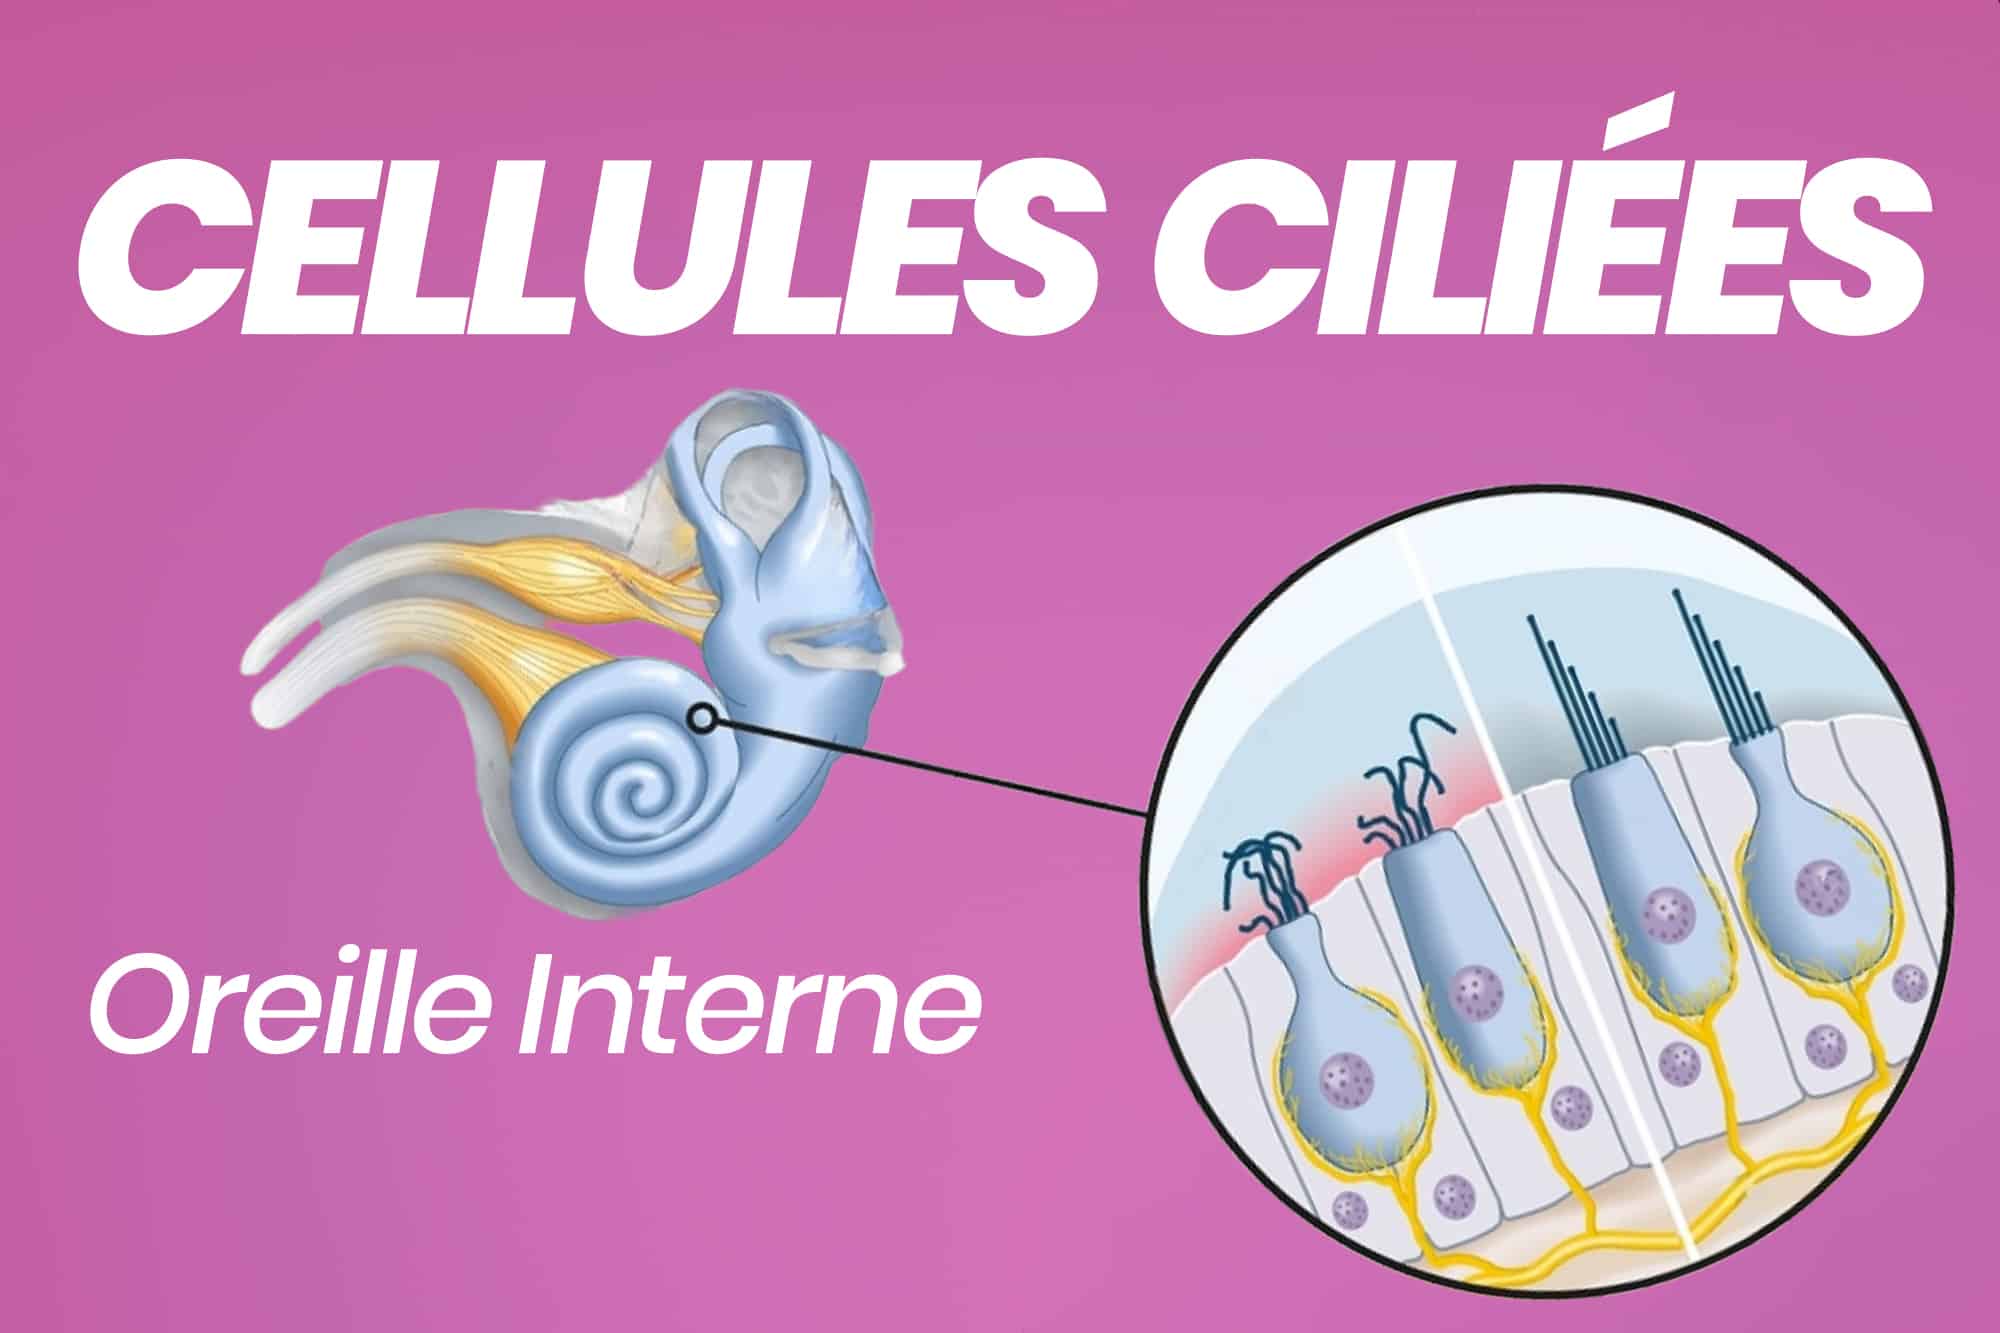 cellules ciliees